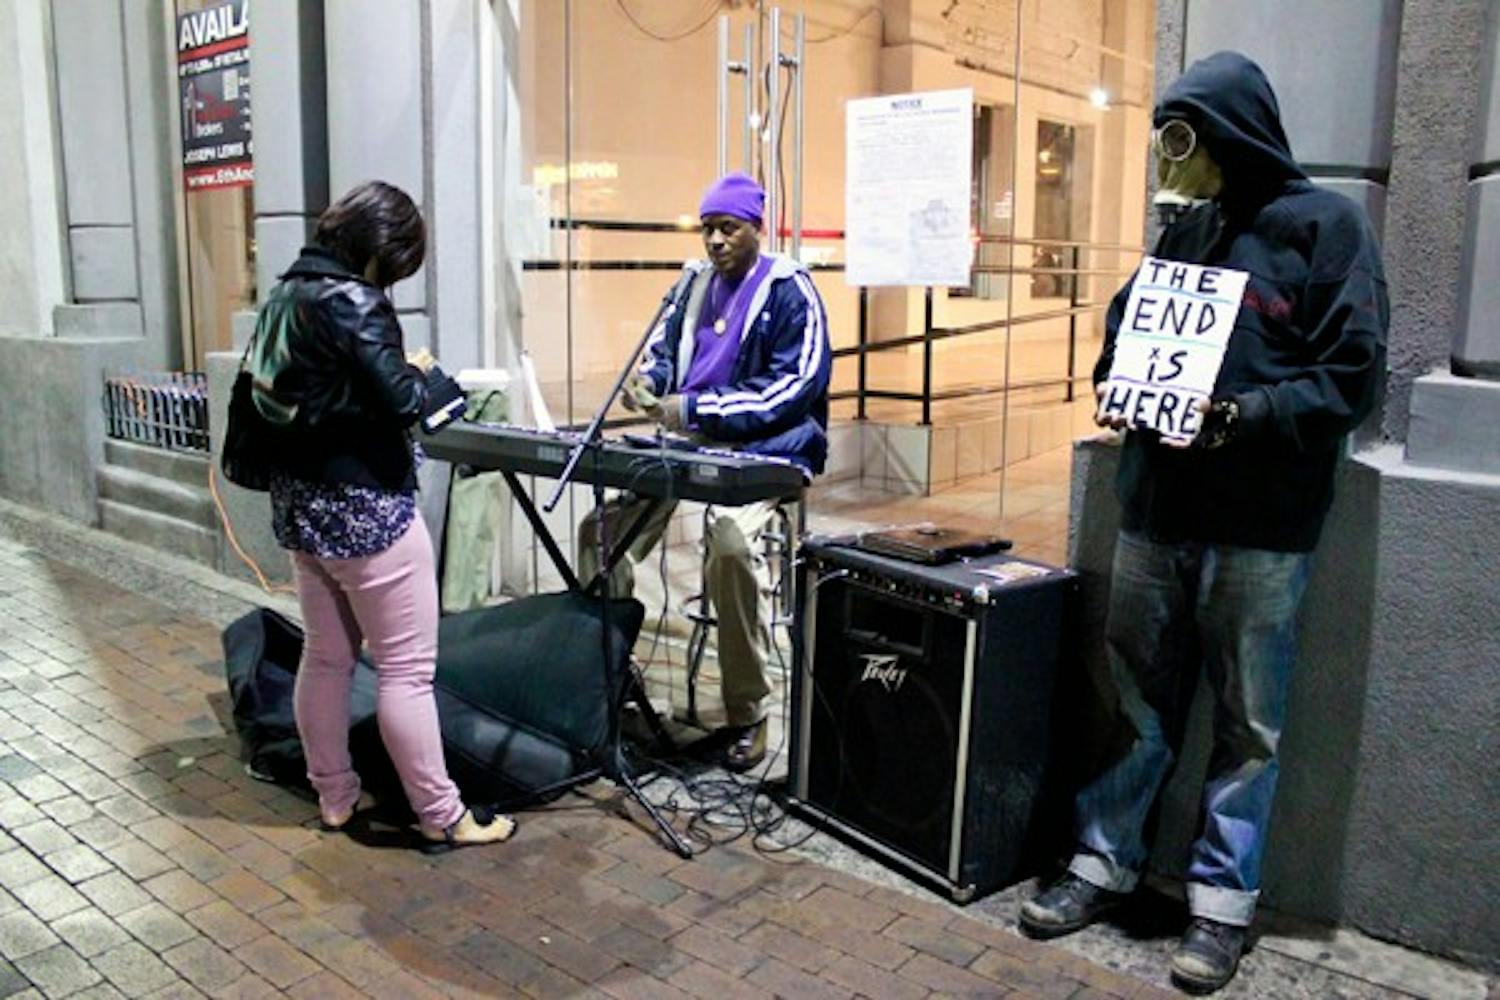 A man in purple, who refused to disclose his name, performs on Mill Avenue for extra cash while a homeless man named Sideshow wearing a gas mask holds a sign informing bystanders that “The End is Here.” (Photo by Marissa Krings)